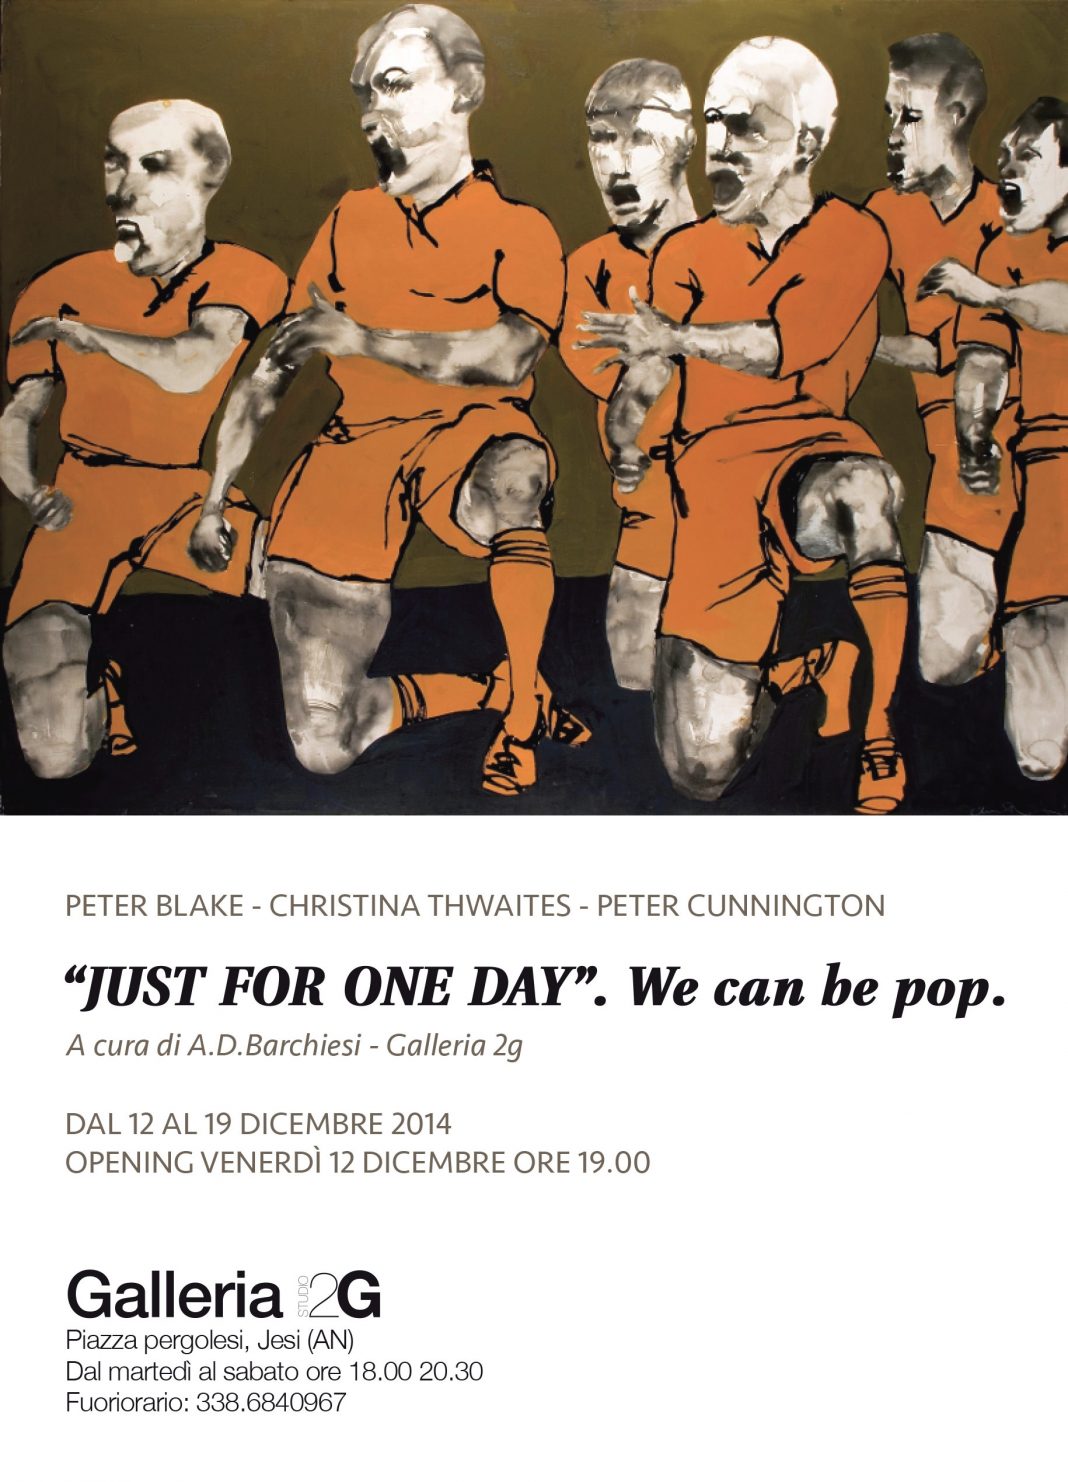 Peter Blake / Christina Thwaites / Peter Cunnington – “Just for one day”. We can be pop.https://www.exibart.com/repository/media/eventi/2014/12/peter-blake-christina-thwaites-peter-cunnington-8211-8220just-for-one-day8221.-we-can-be-pop-1068x1482.jpg